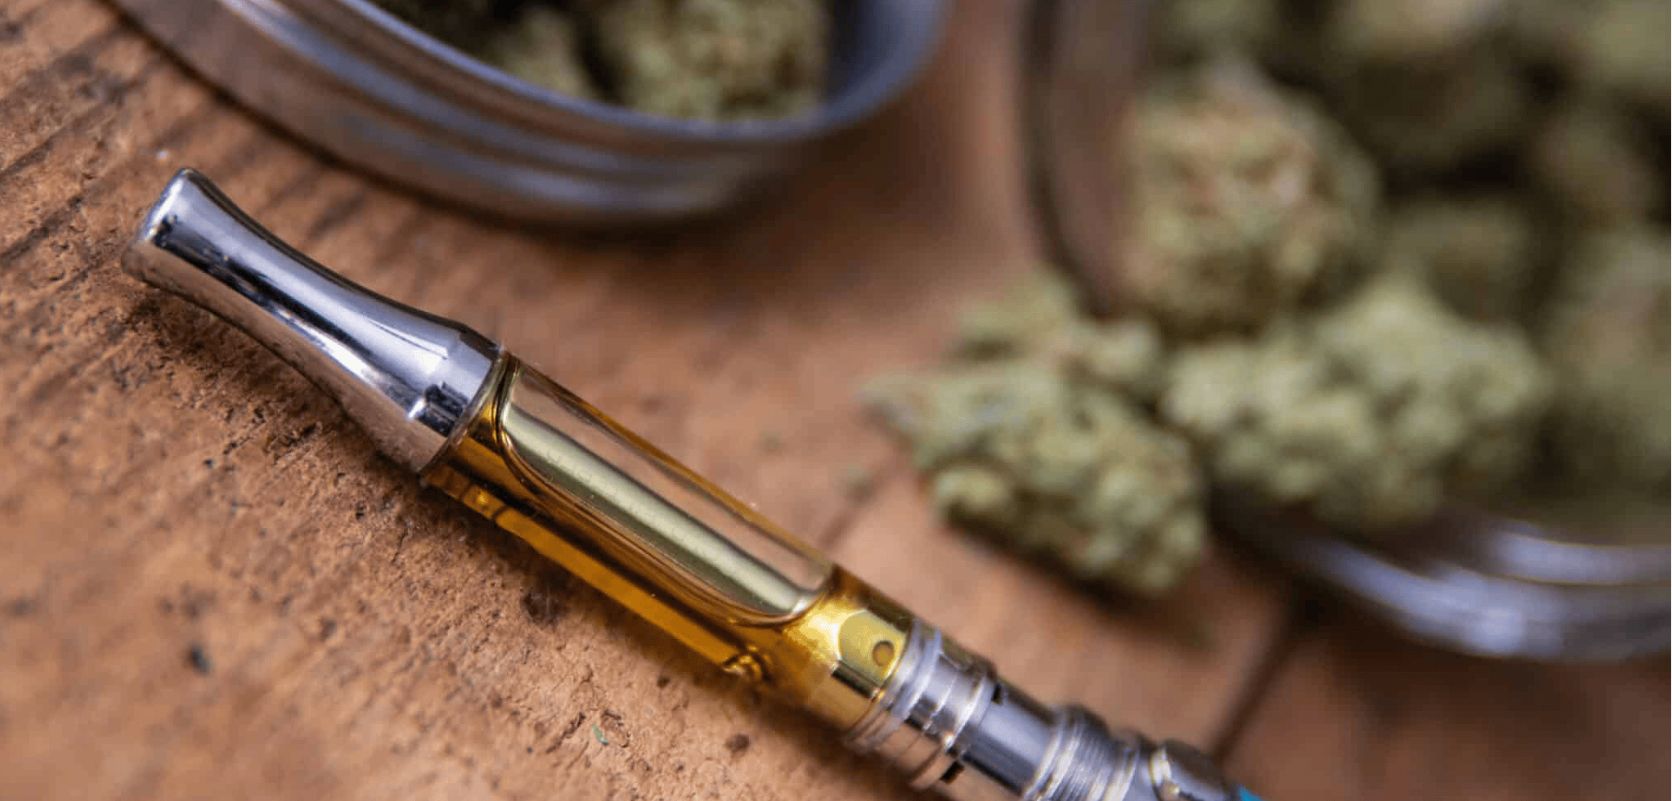 Dab pens, also sometimes called a wax pens, are a portable battery-powered vaporizer designed for consuming cannabis concentrates.